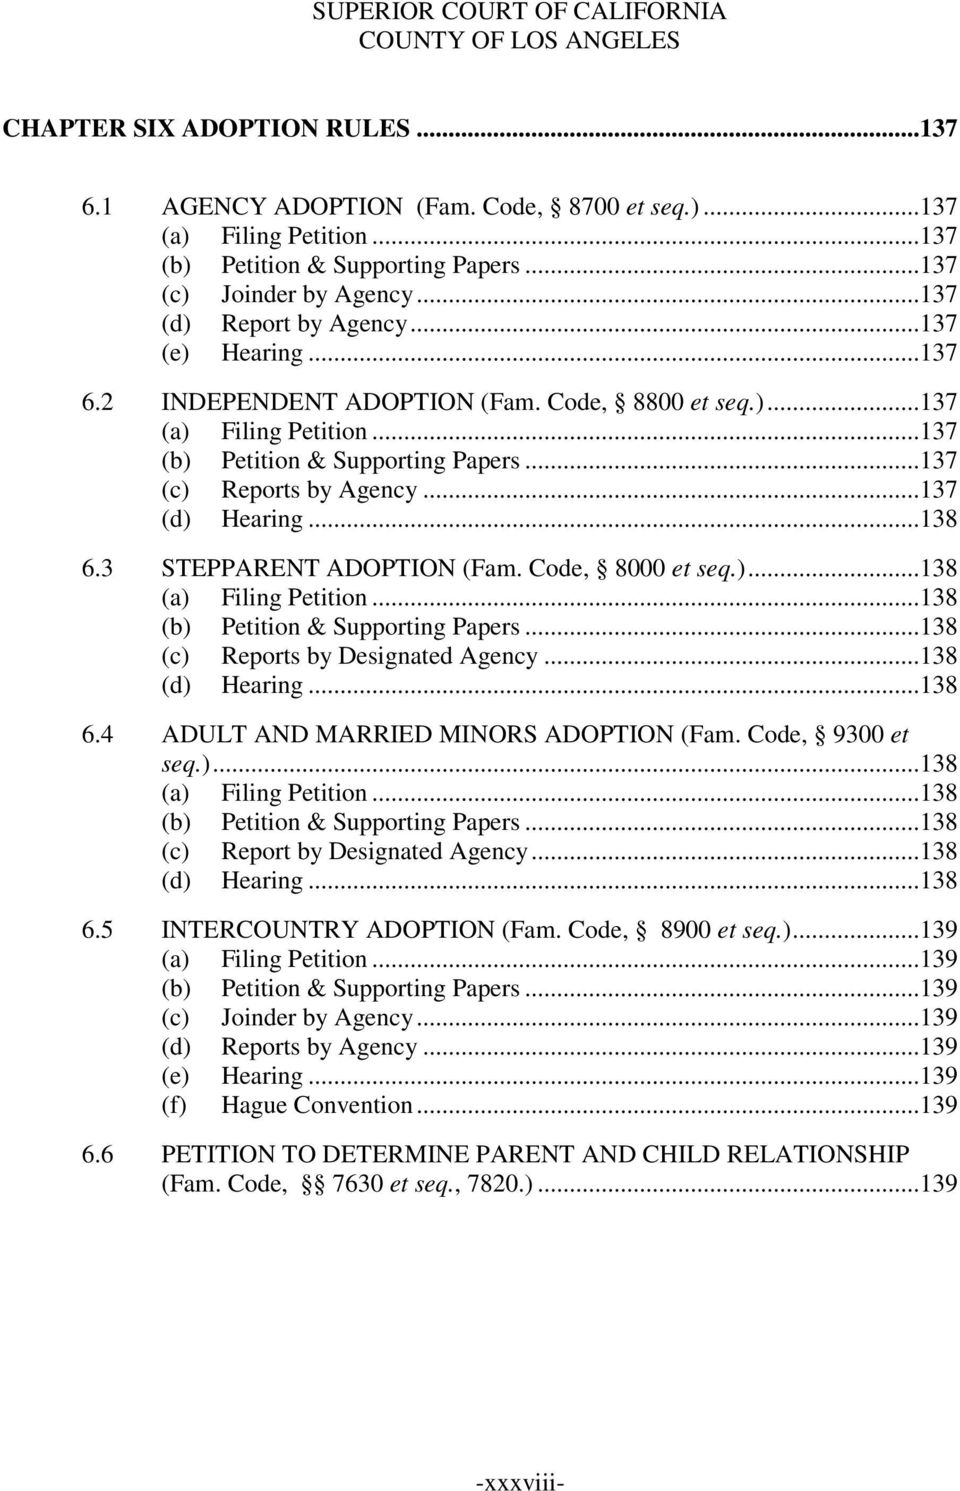 3 STEPPARENT ADOPTION (Fam. Code, 8000 et seq.)...138 (a) Filing Petition...138 (b) Petition & Supporting Papers...138 (c) Reports by Designated Agency...138 (d) Hearing...138 6.